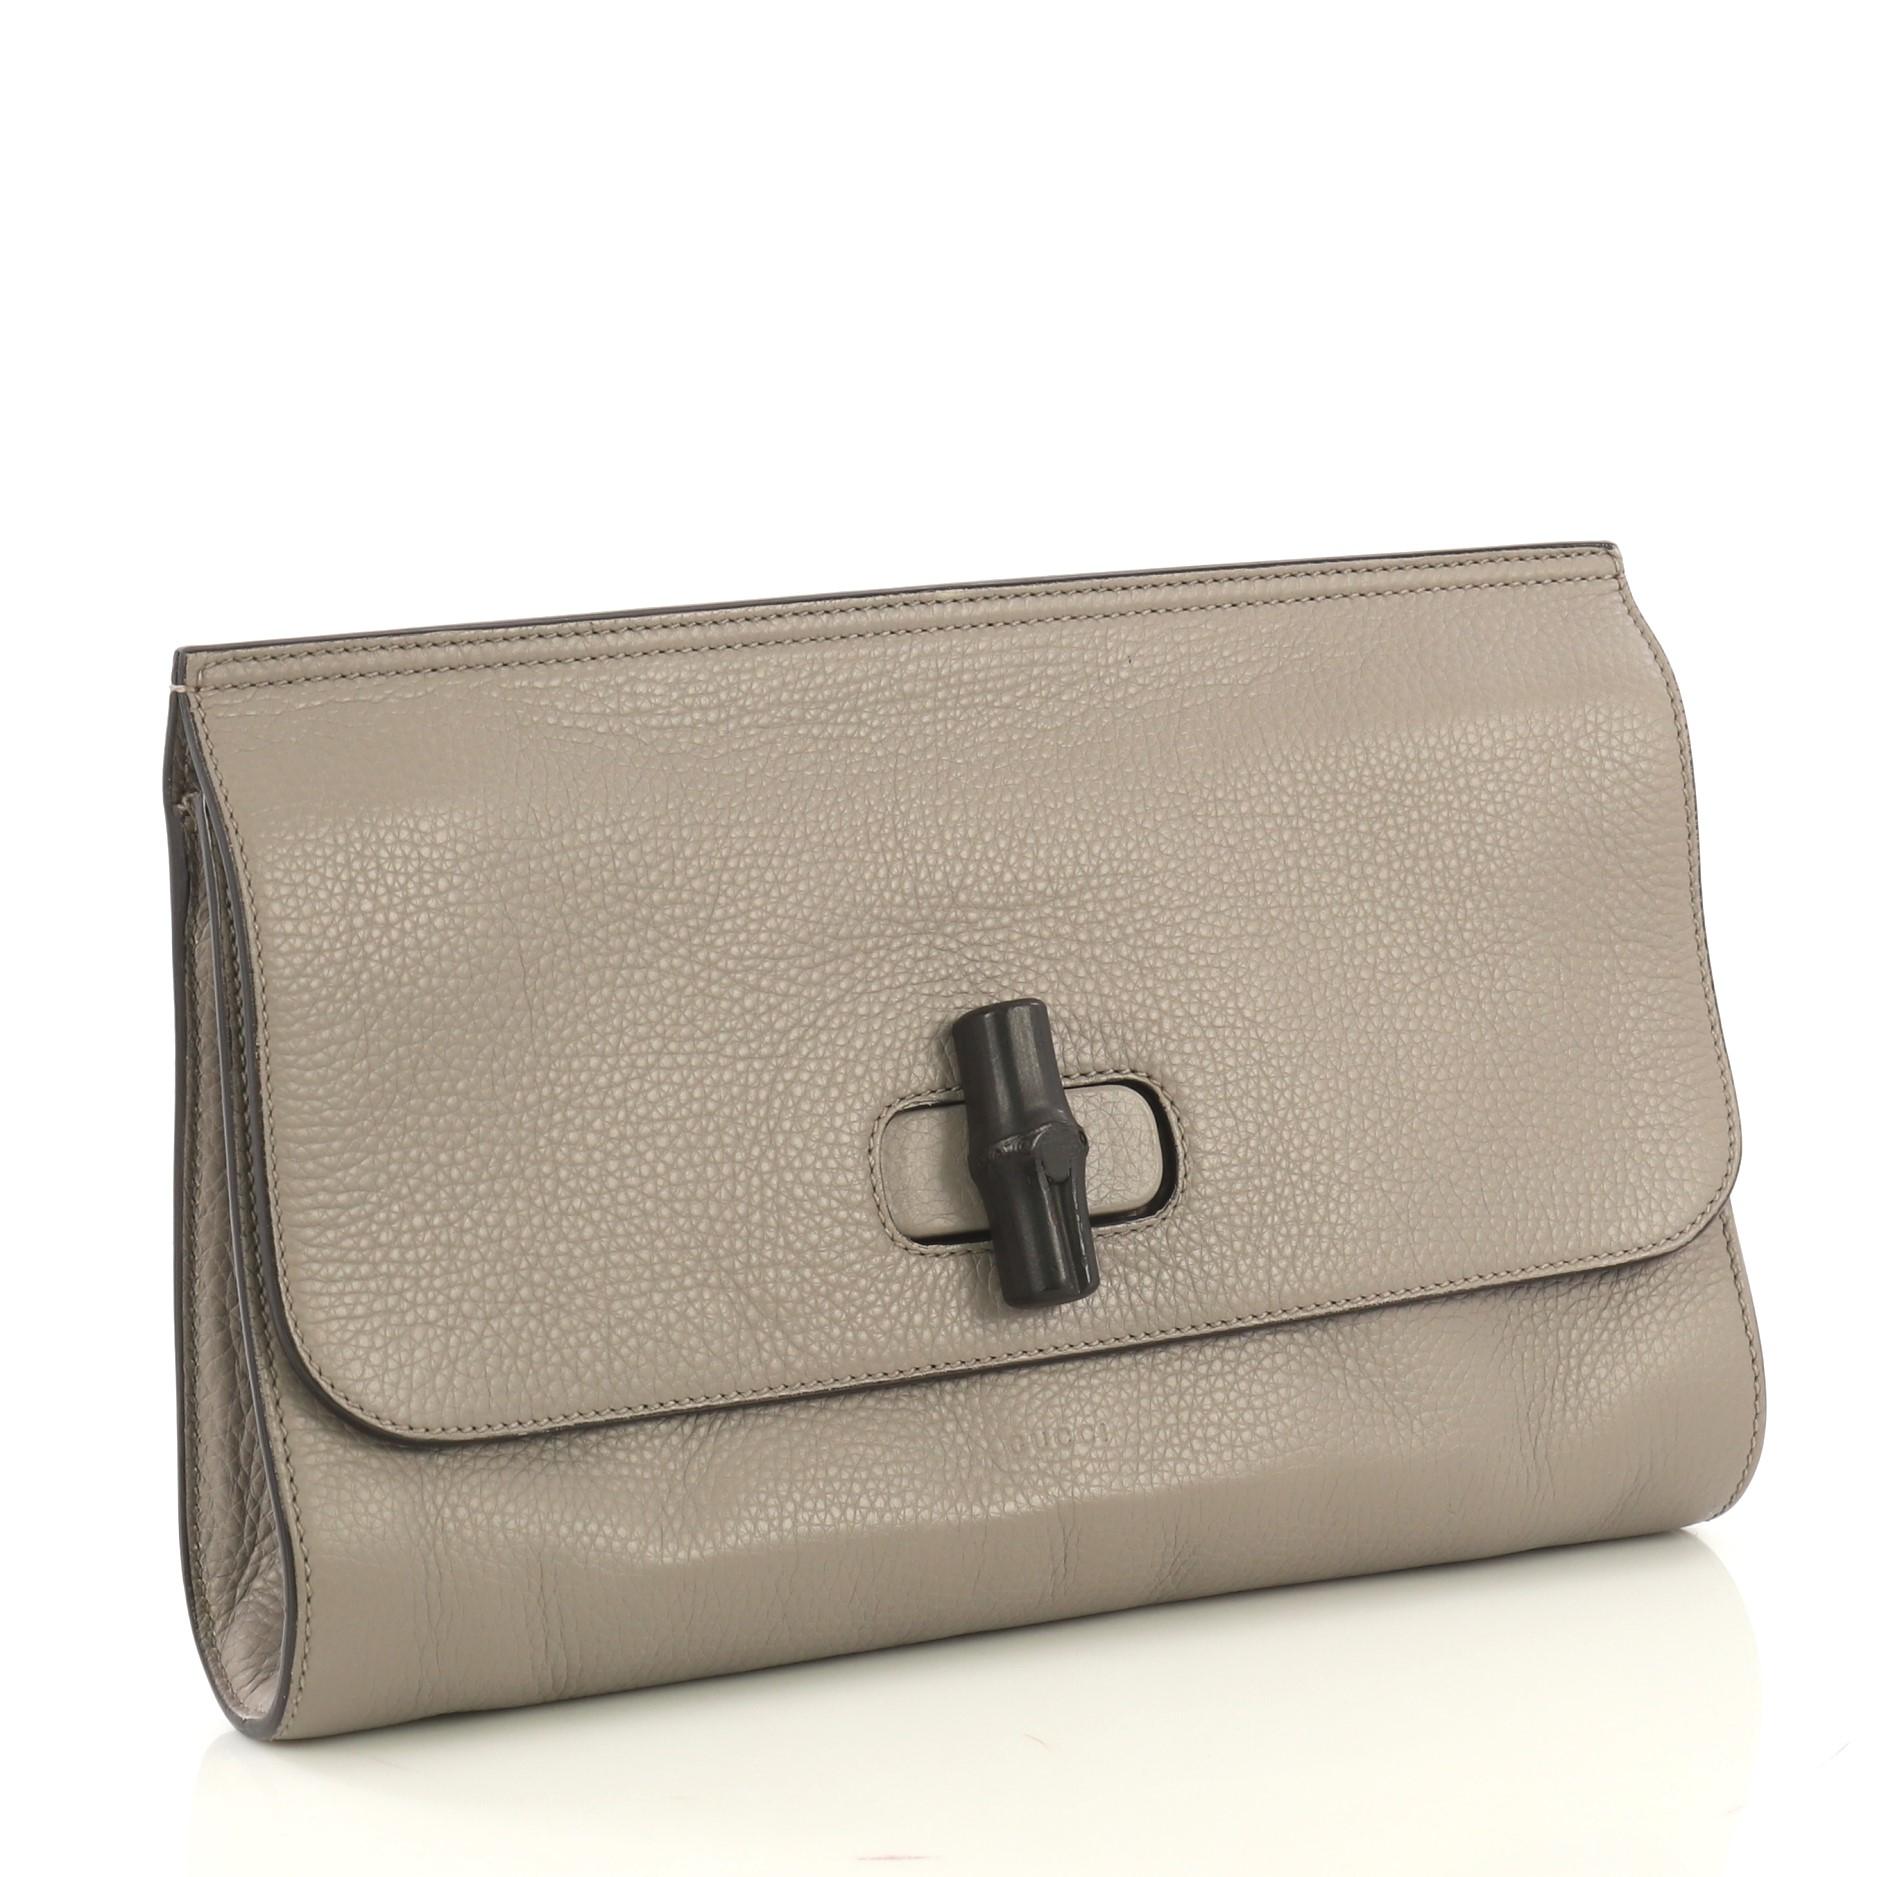 This Gucci Bamboo Daily Clutch Leather, created in gray leather, features flap closure with dark lacquered bamboo detail, back slip pocket and silver-tone hardware. Its turn-lock closure opens to a light pink printed fabric interior with zip and